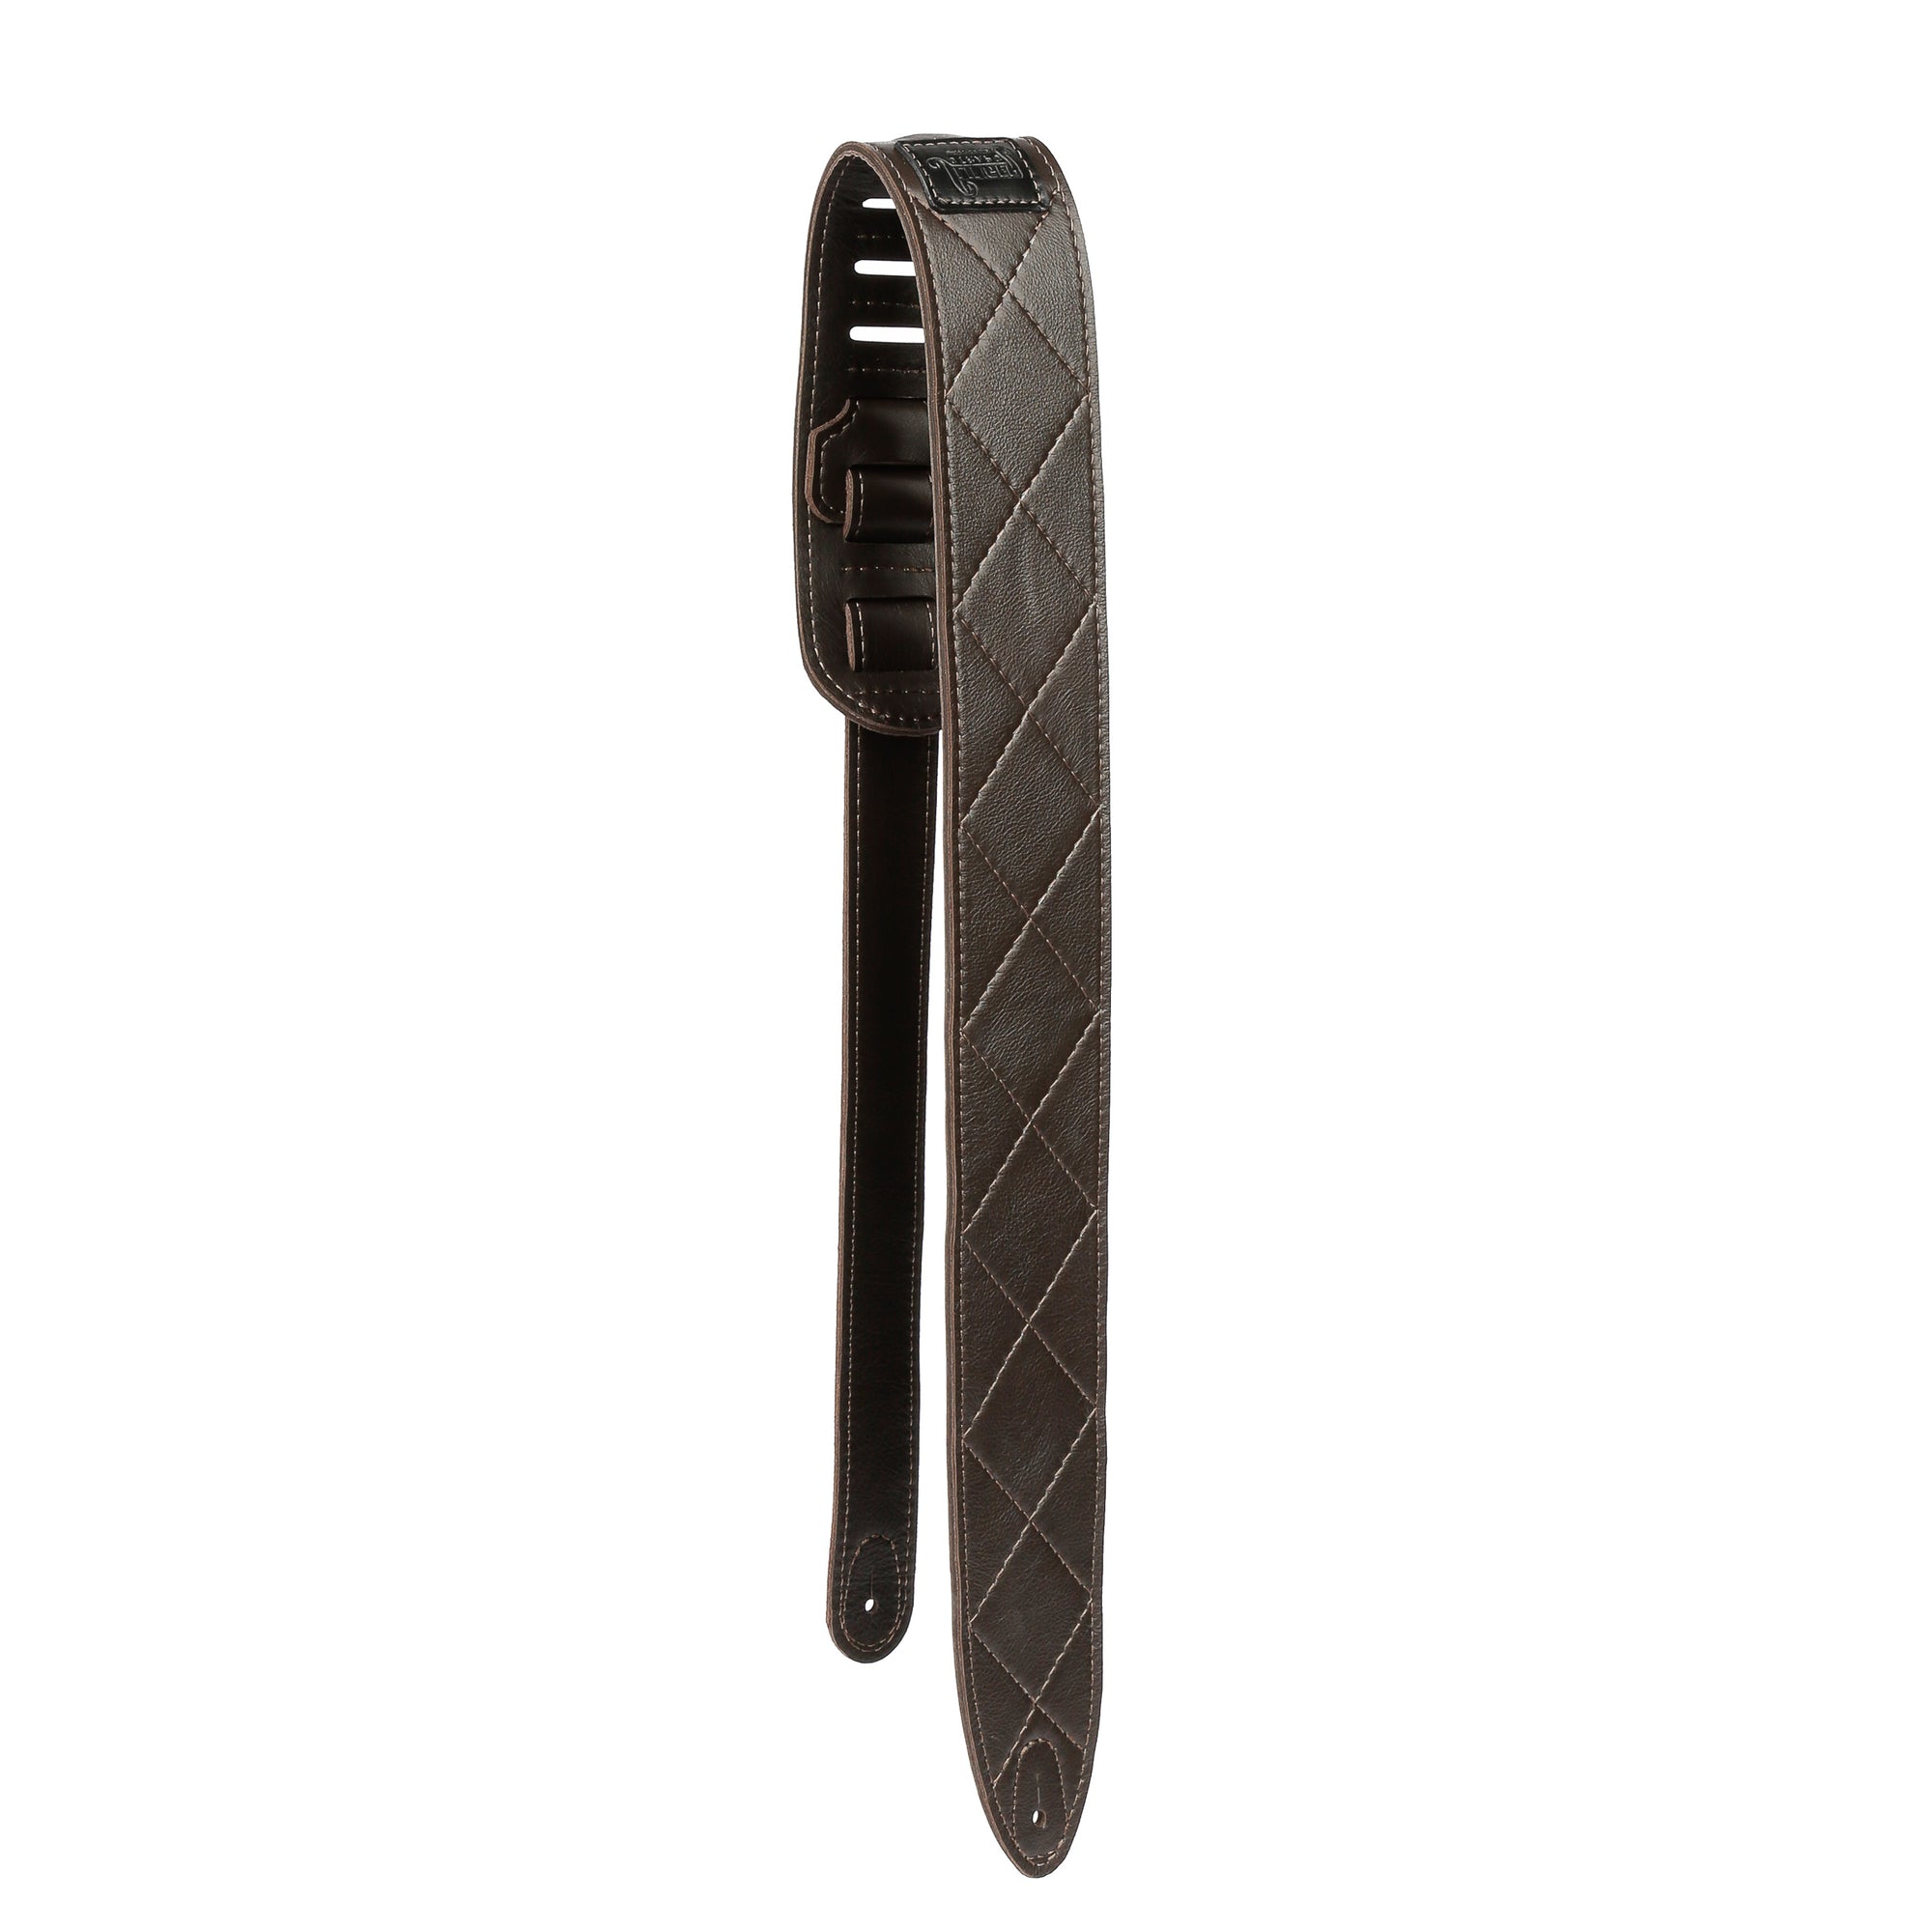 3-inch wide brown leather guitar strap with diamond stitched pattern